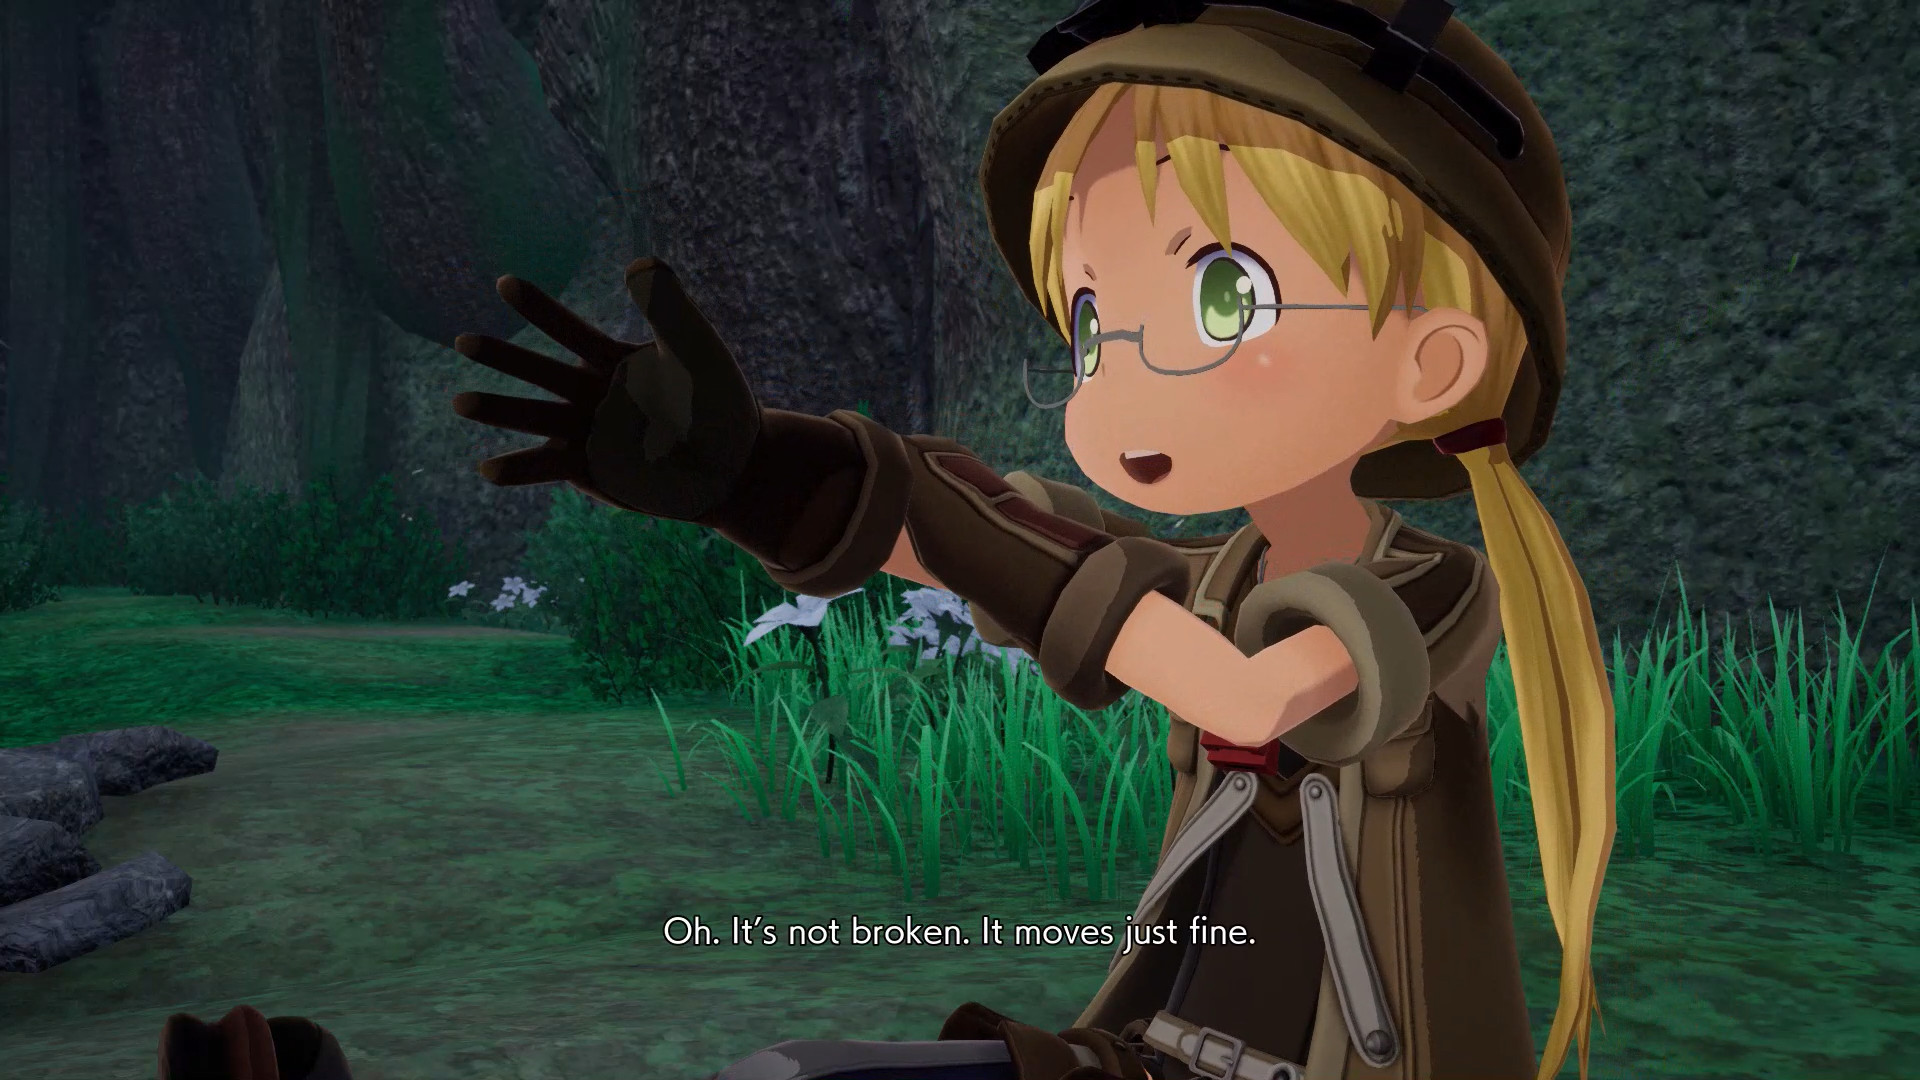 Made in Abyss - The Perfect Adaptation